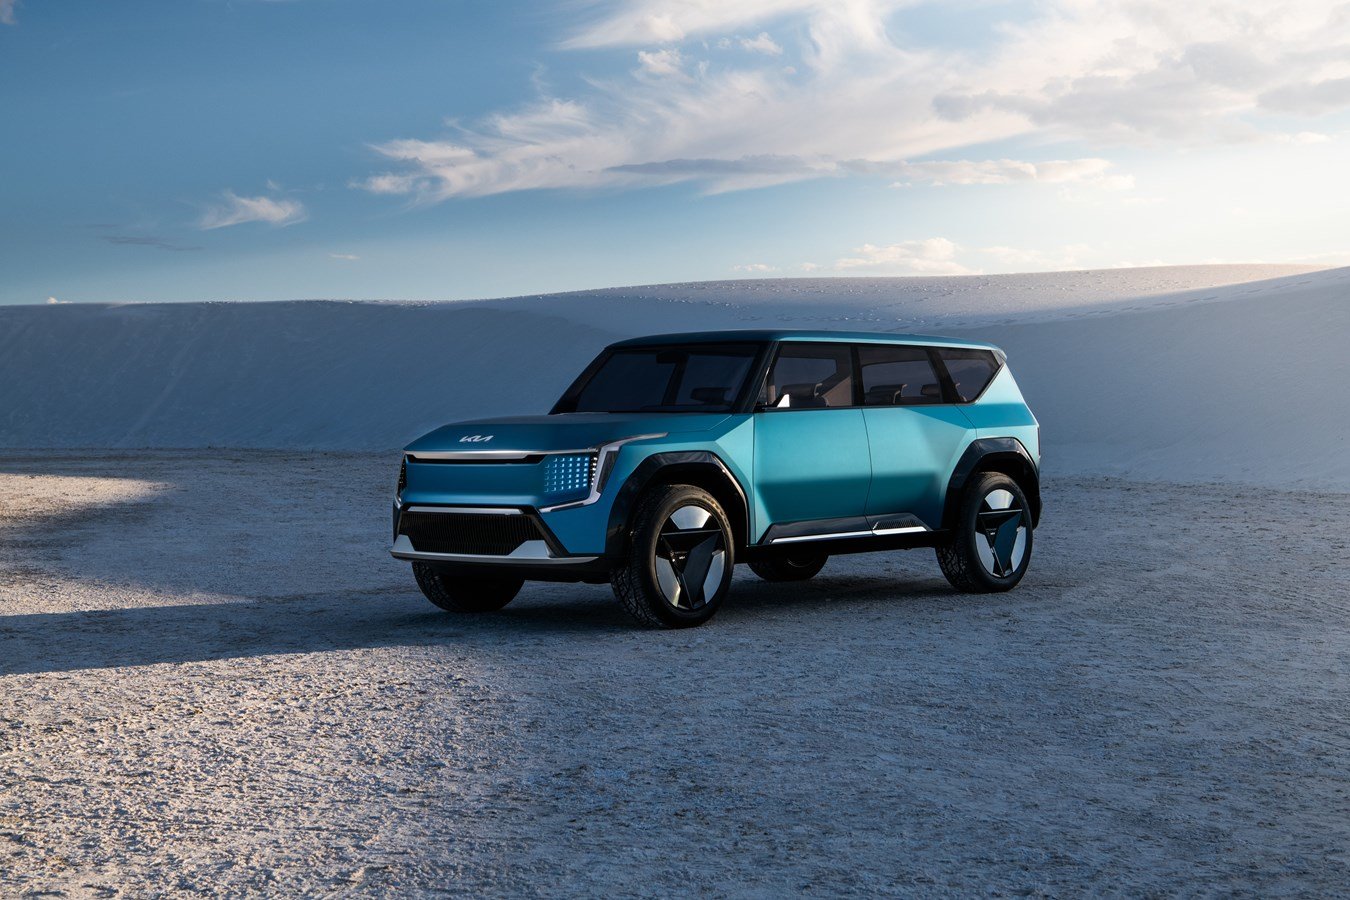 All-Electric 2021 Kia EV9 Concept Is Telluride-Sized With 482 Kilometres Of Range And Ultra-Fast Charging